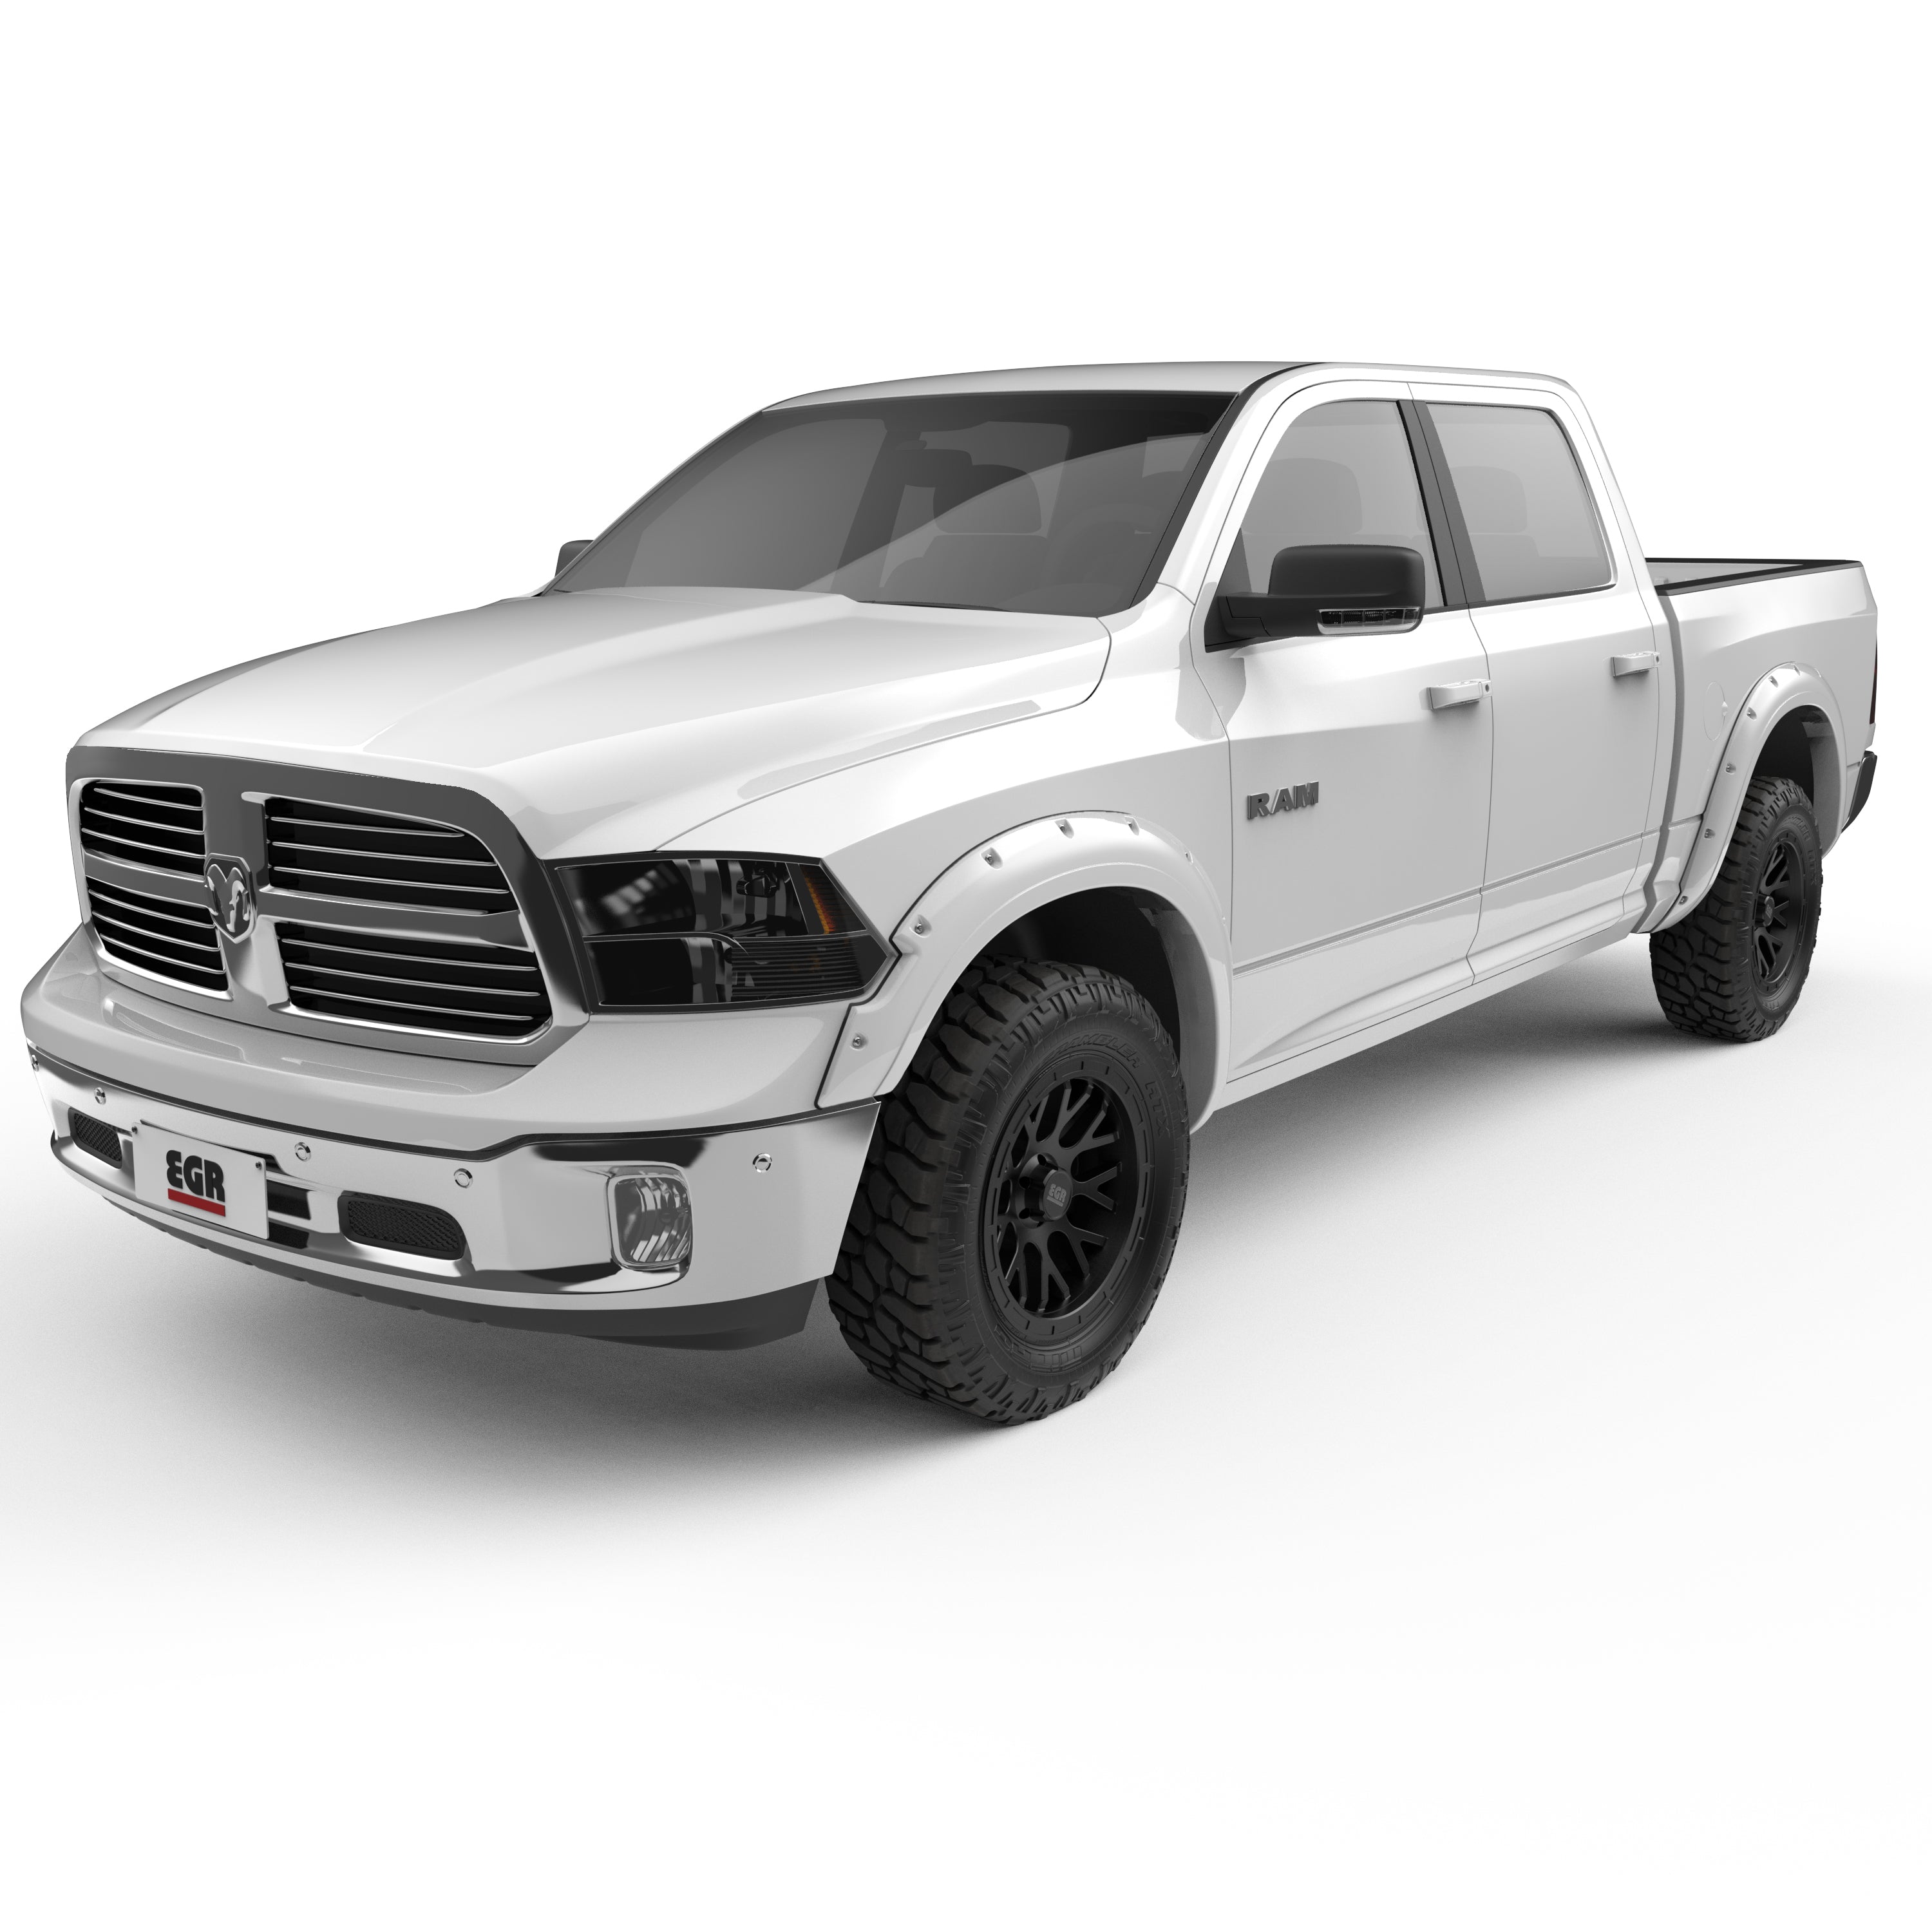 EGR 2009-2018 Dodge Ram 1500 2011-2023 Ram 1500 Classic 2 & 4 Door Standard Cab Extended Cab Crew Cab Pickup Traditional Bolt-on look Fender Flares set of 4 Painted to Code Bright White 792654-PW7